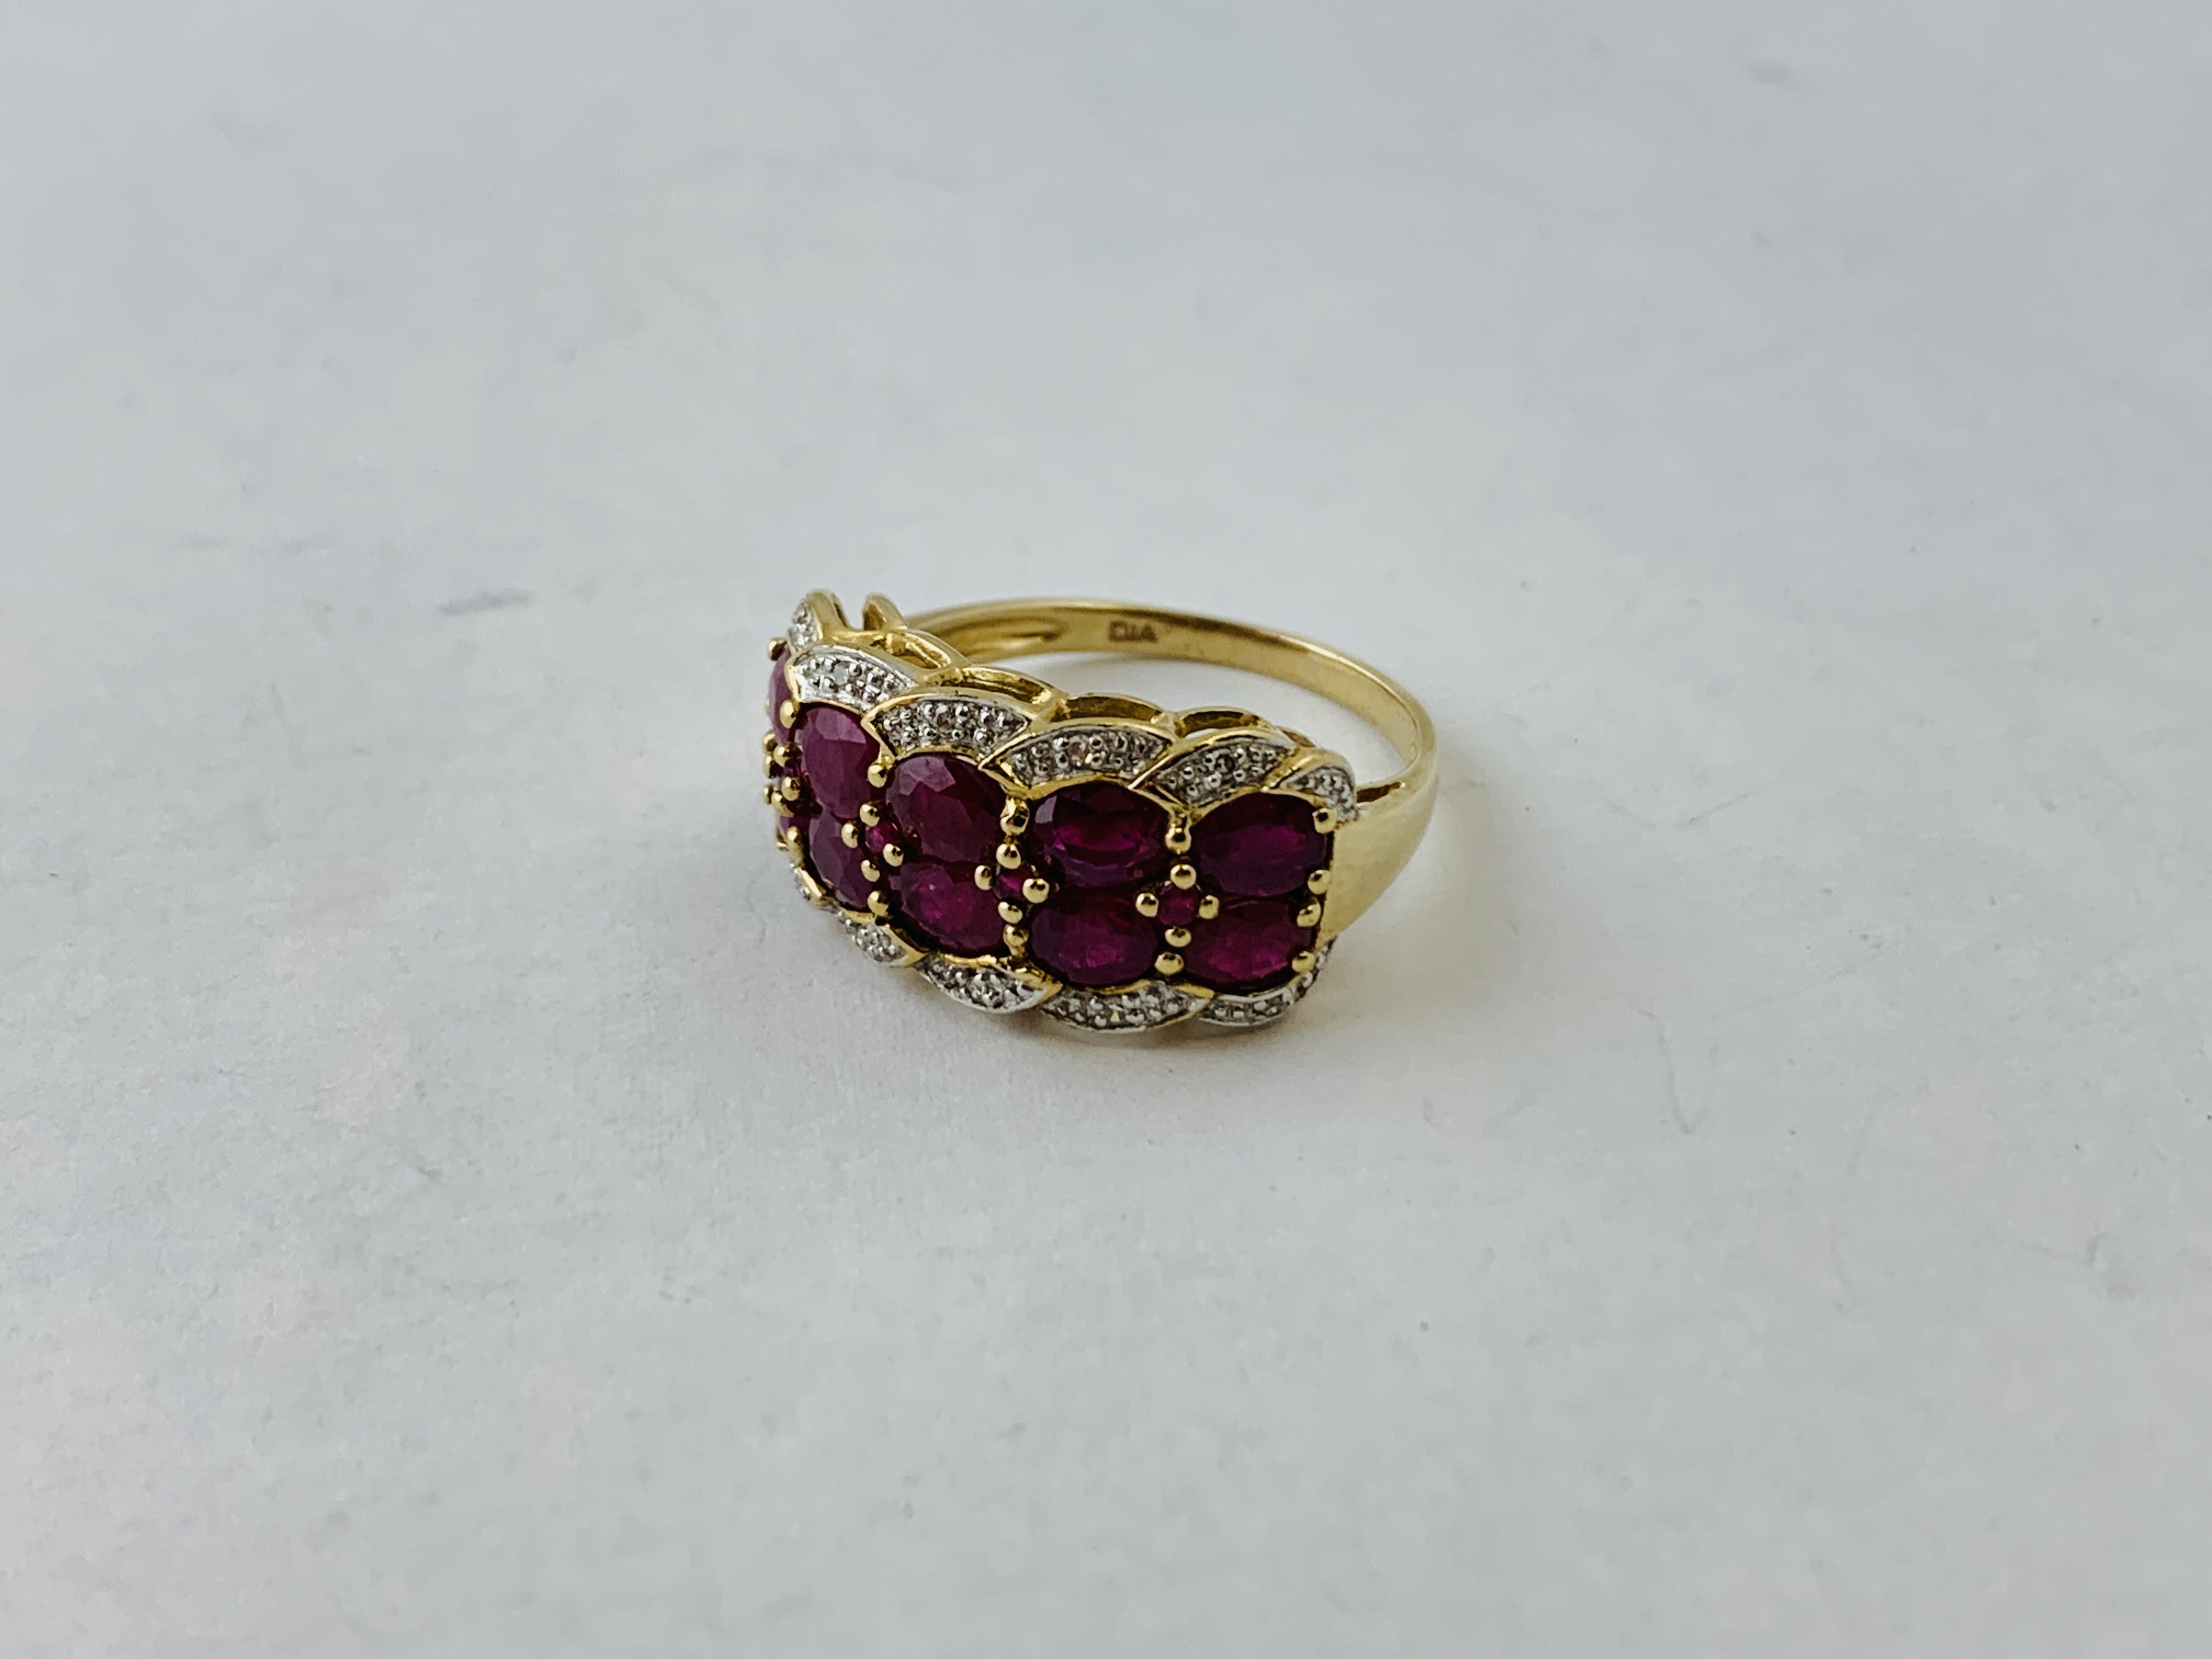 LADIES 9CT GOLD RUBY AND DIAMOND RING THE 10 PRINCIPLE RUBY'S SURROUNDED BY DIAMOND CHIPS SIZE Q/R